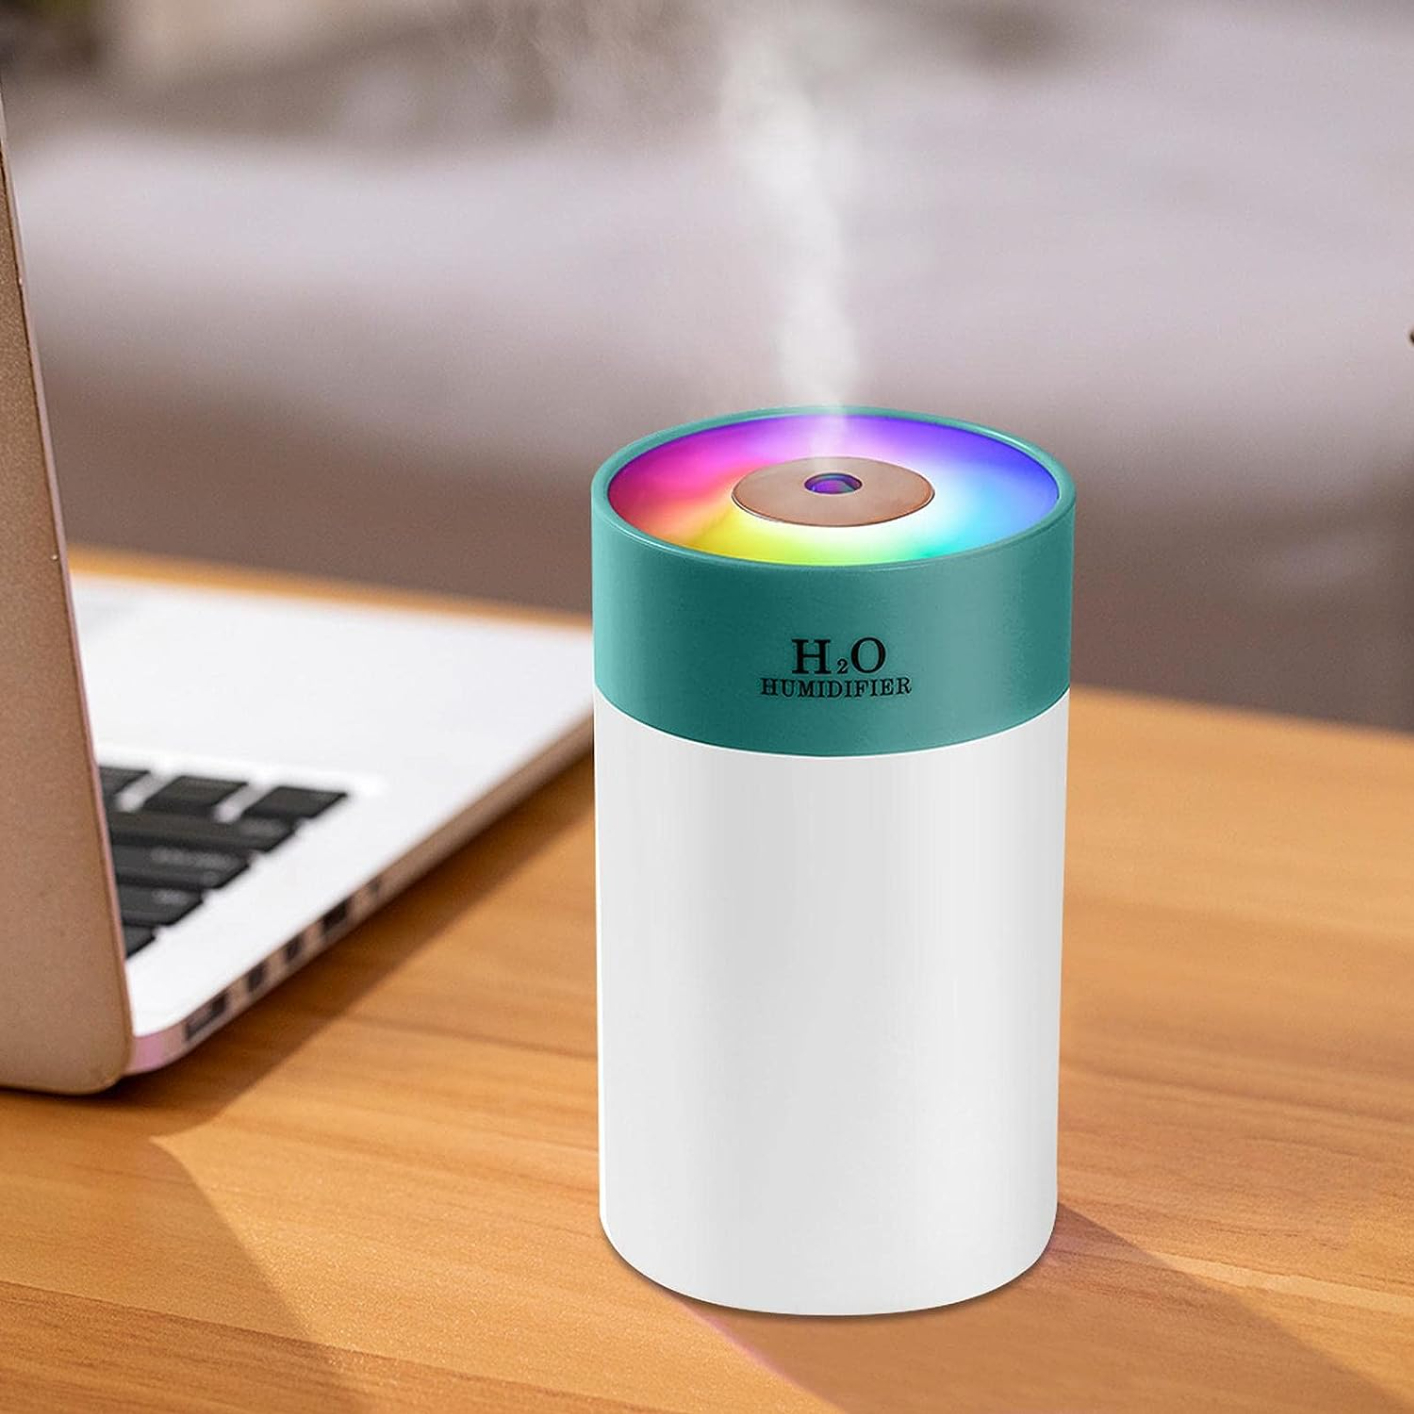 USB Colorful Humidifier, Humidifiers for Bedroom, 260mL Premium Aromatherapy Humidifier, Light Up Design Easy to Use Running Lamp Humidifier, Natural Home Fragrance Aroma Diffuser for Car Home Travel Night Atmosphere Lamp